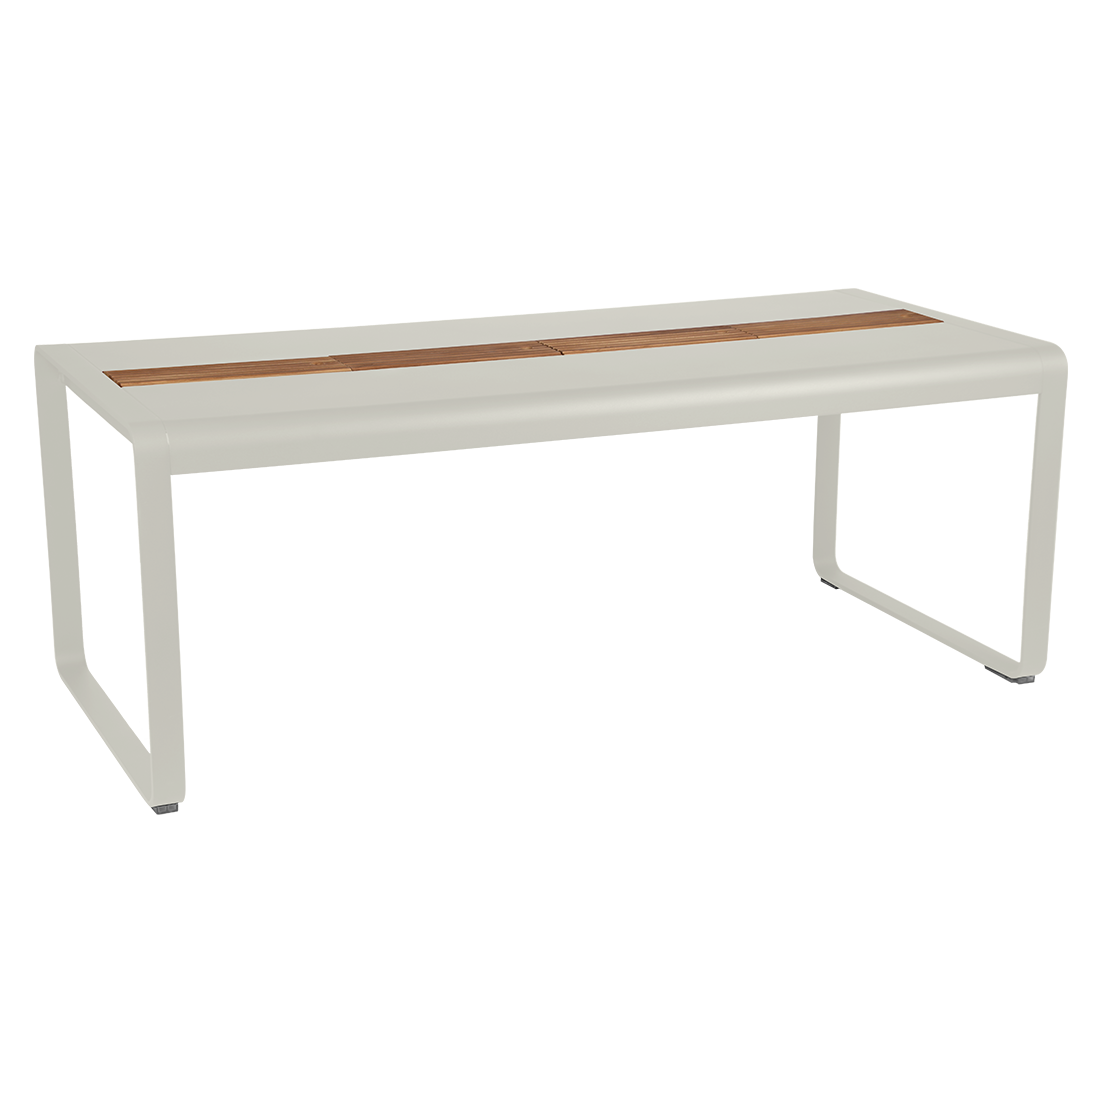 BELLEVIE / TABLE 90 X 196 - WITH STORAGE